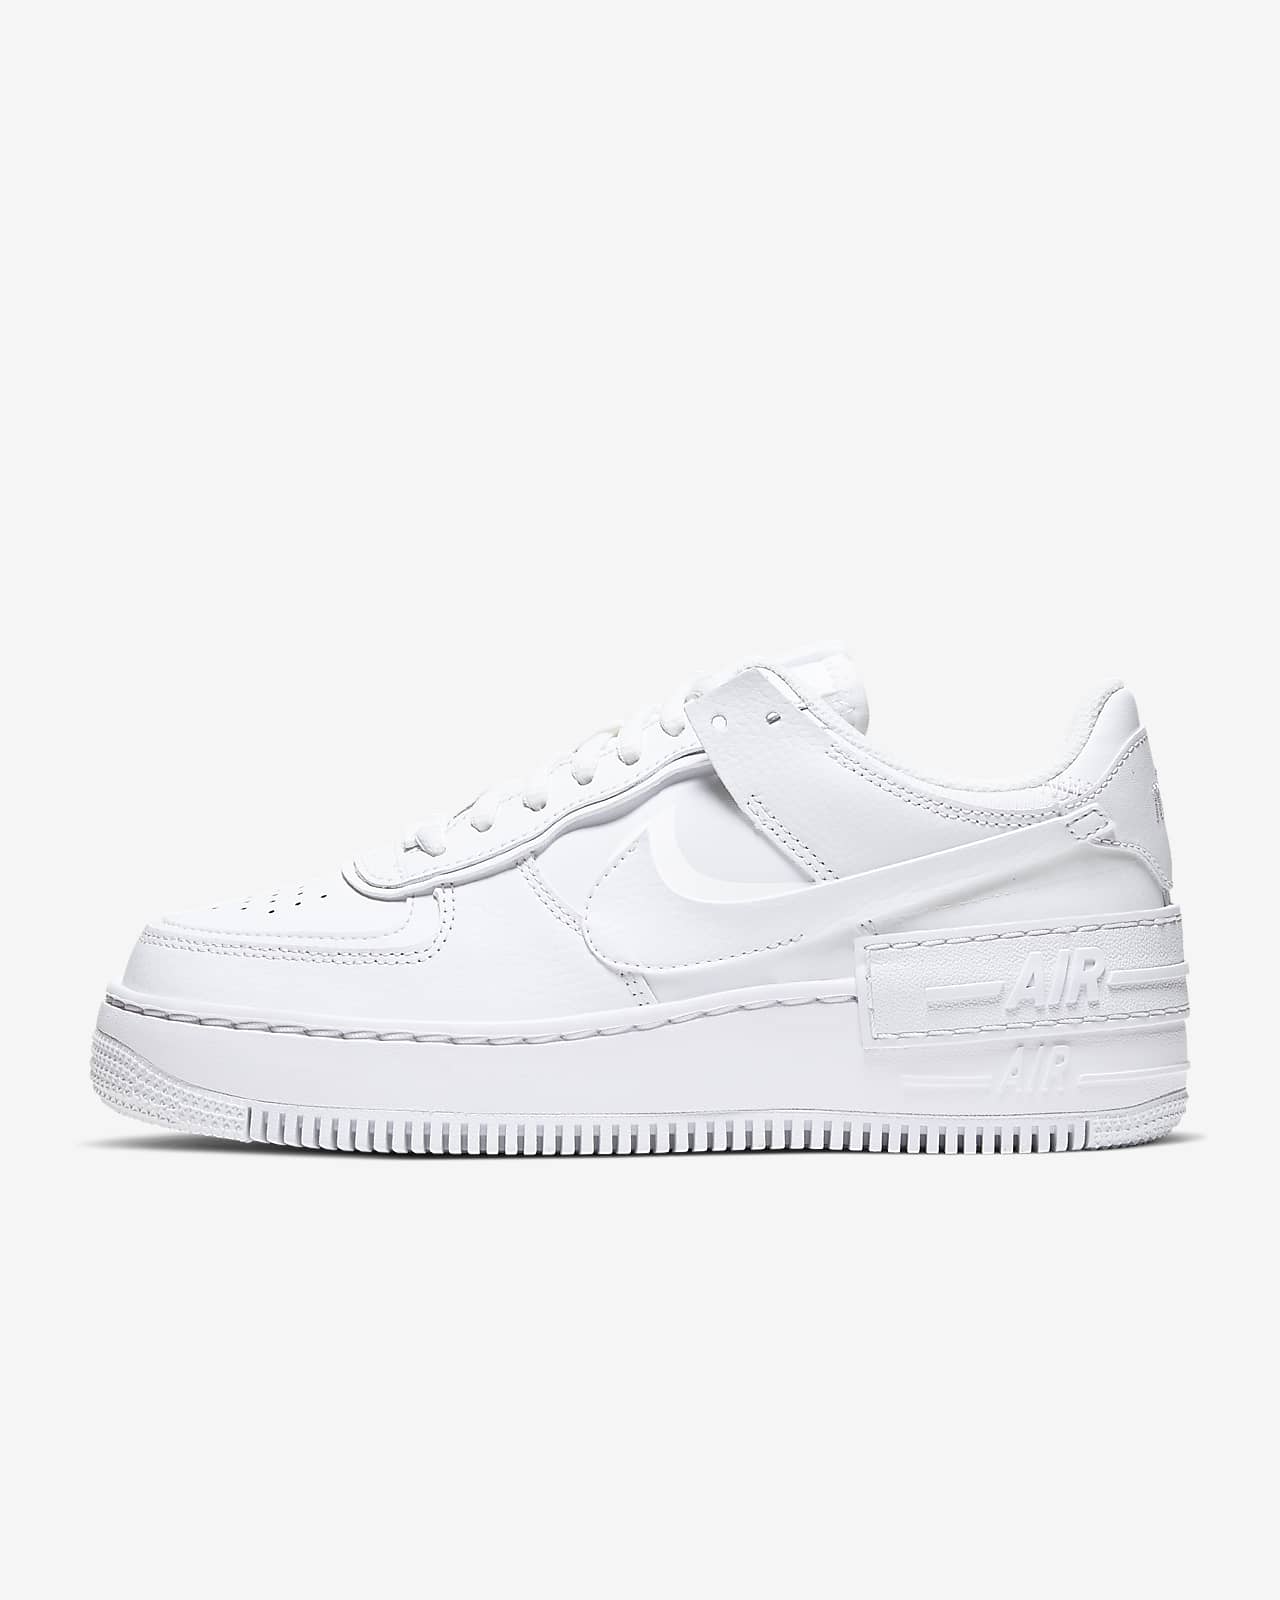 all white air force 1s